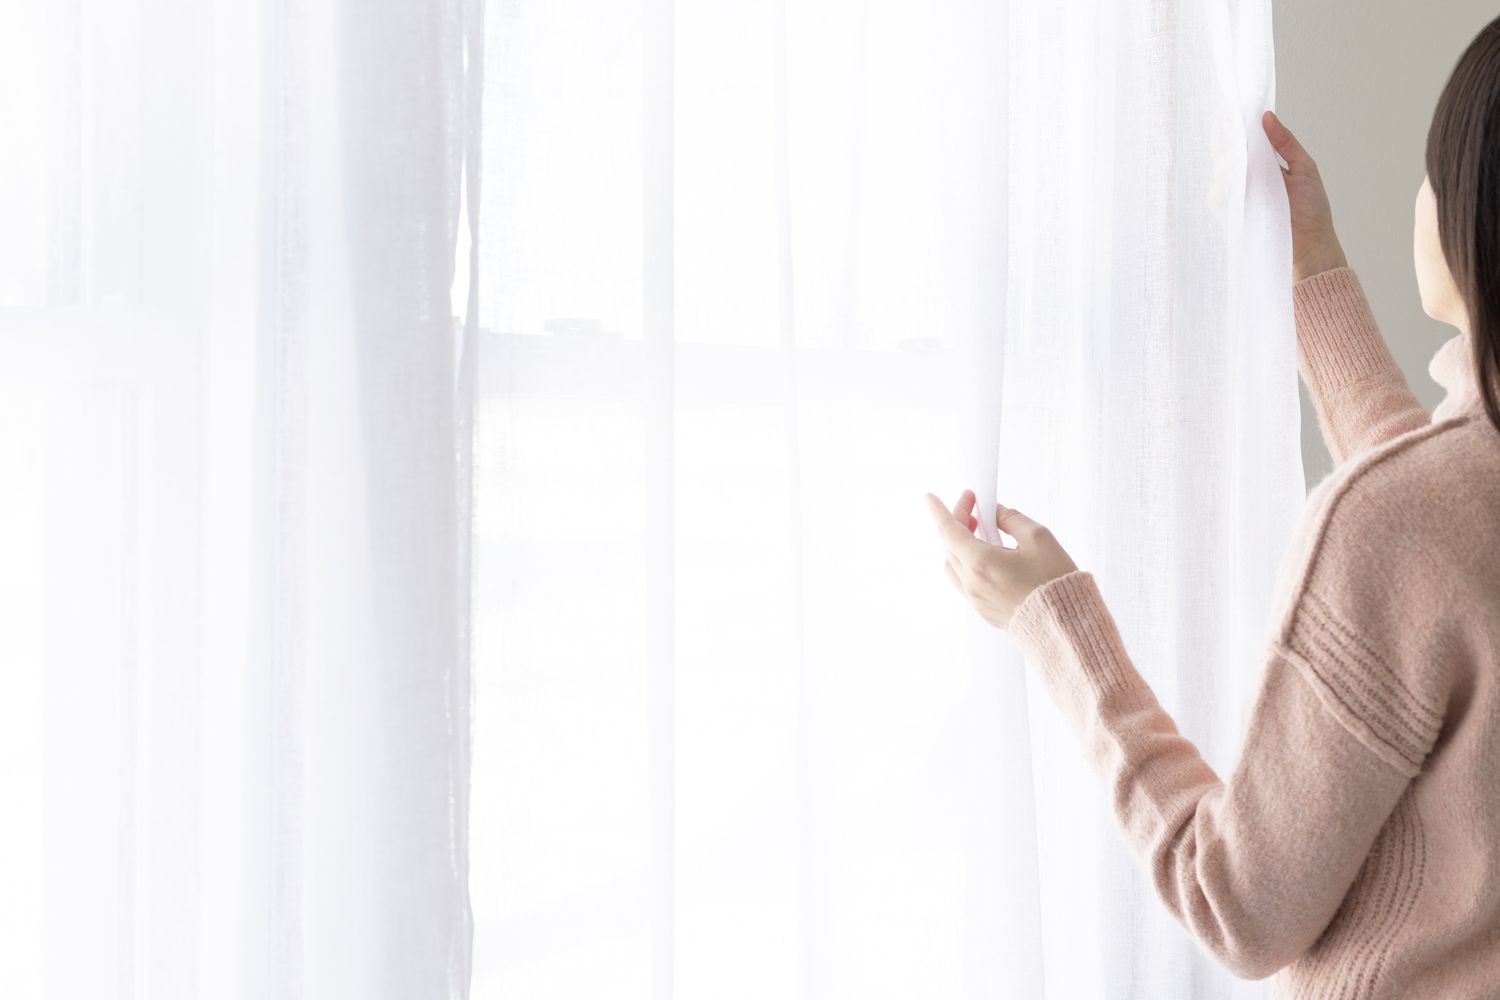 How To Wash And Care For Curtains And Drapes: The Right Way